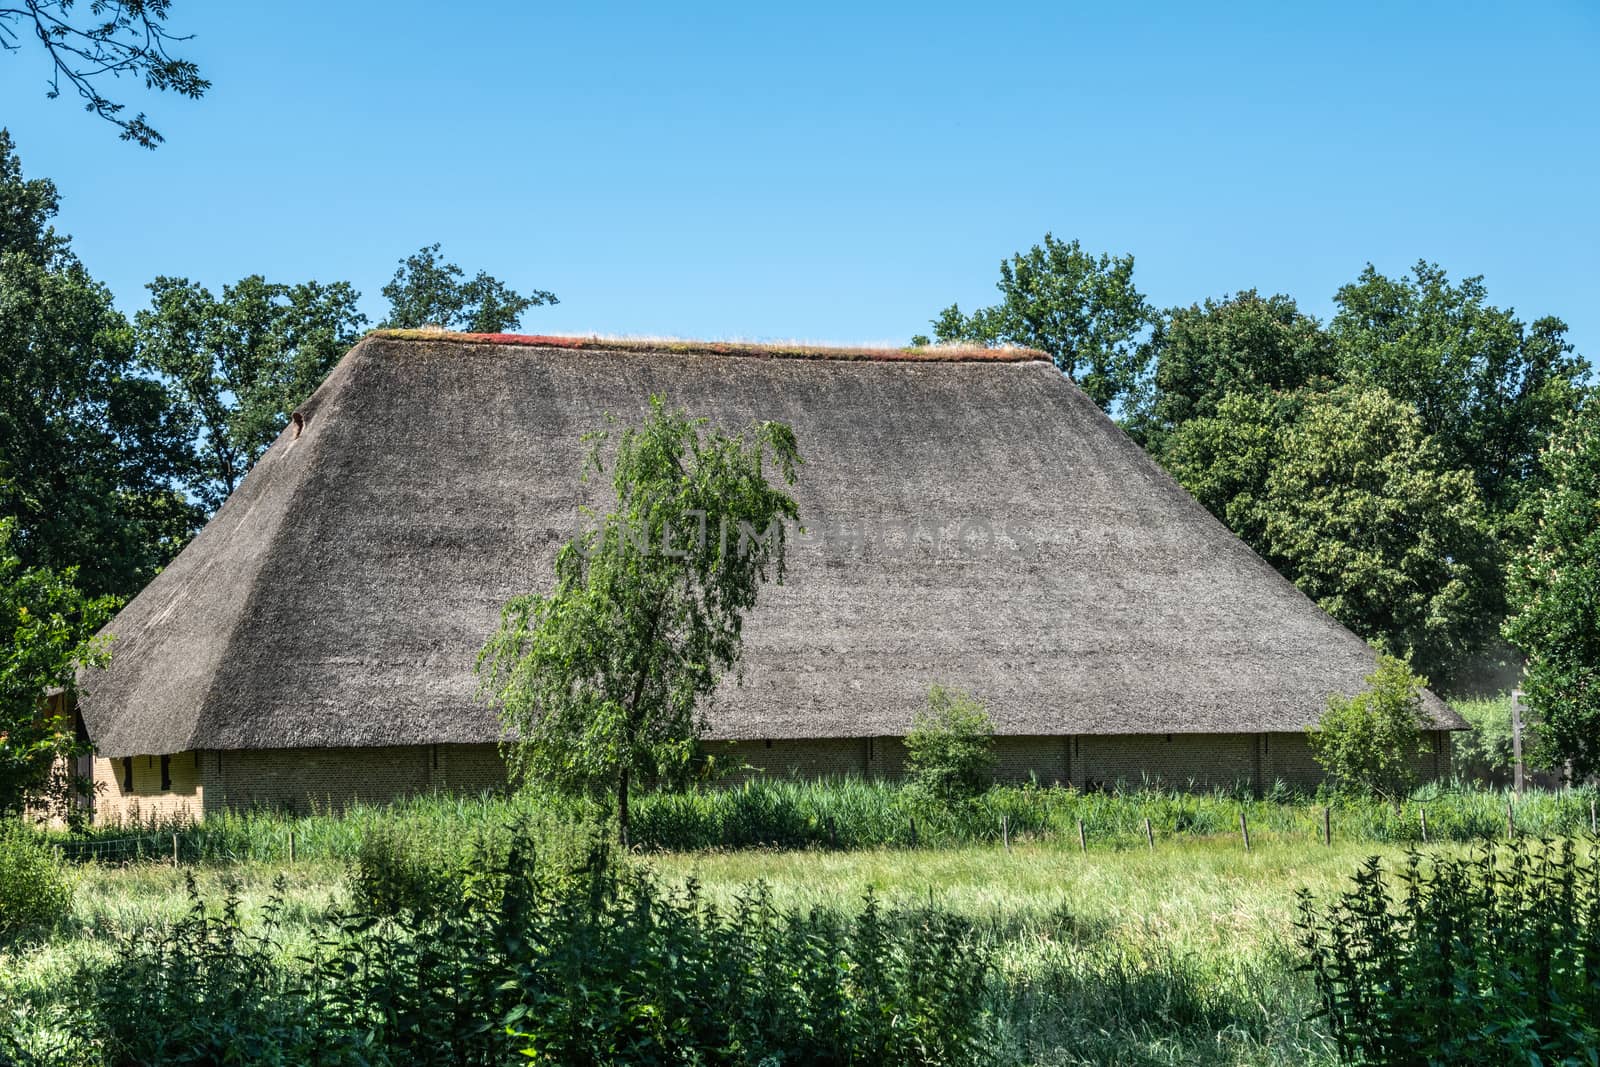 Bokrijk, Belgium - June 27, 2019: Giant barn with gray straw roof is set in green of meadow and surrounding trees under blue sky.